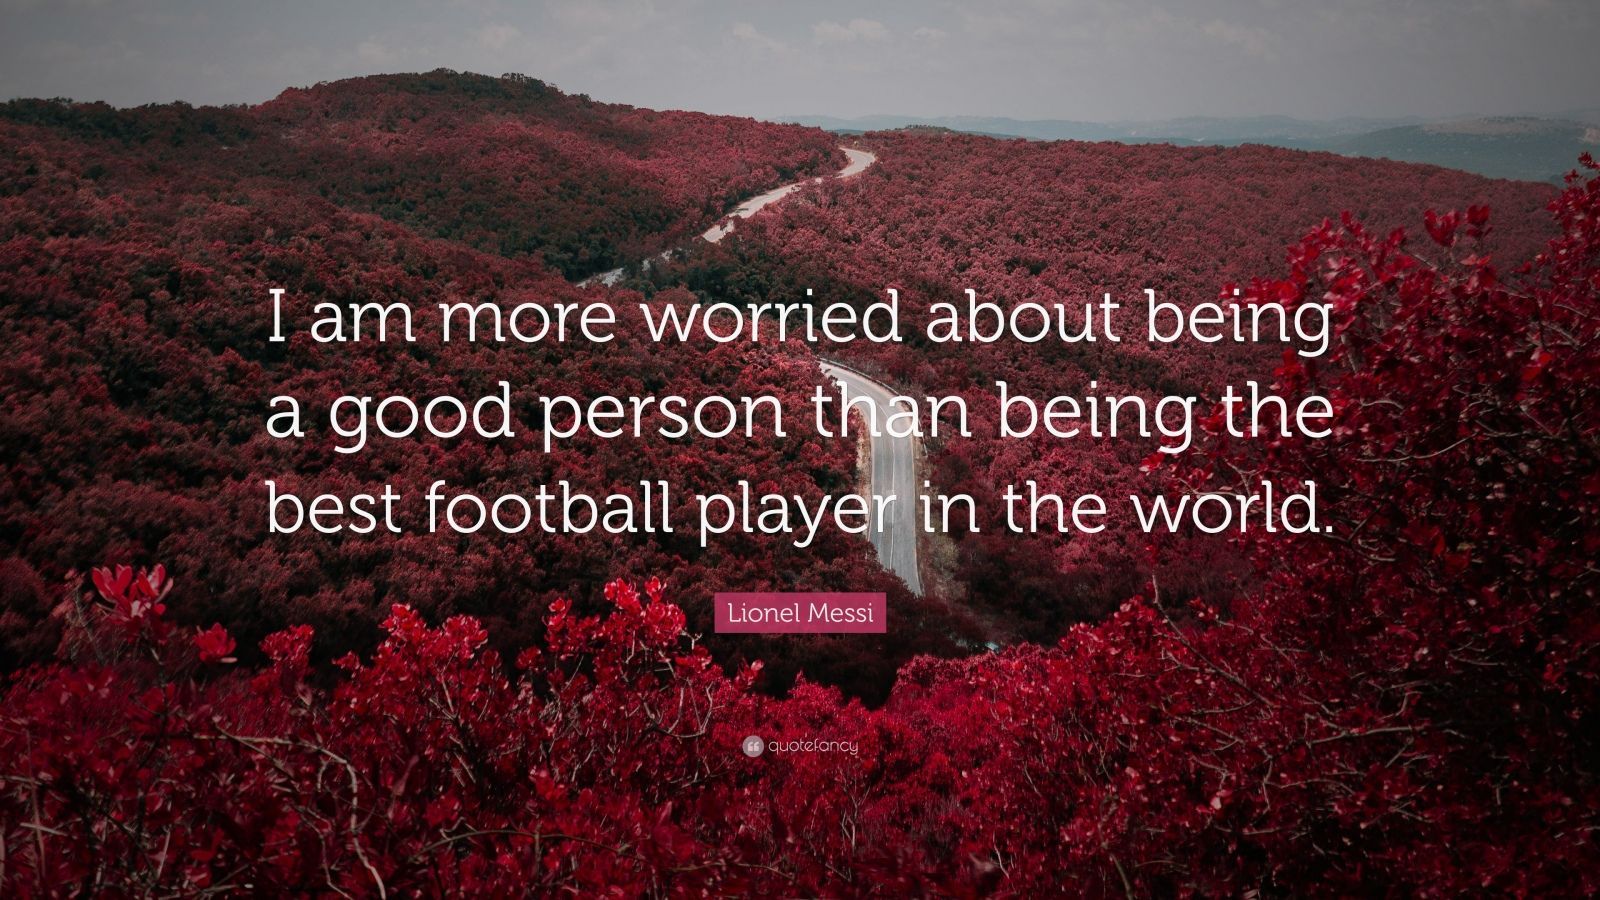 Lionel Messi Quote: “I am more worried about being a good person